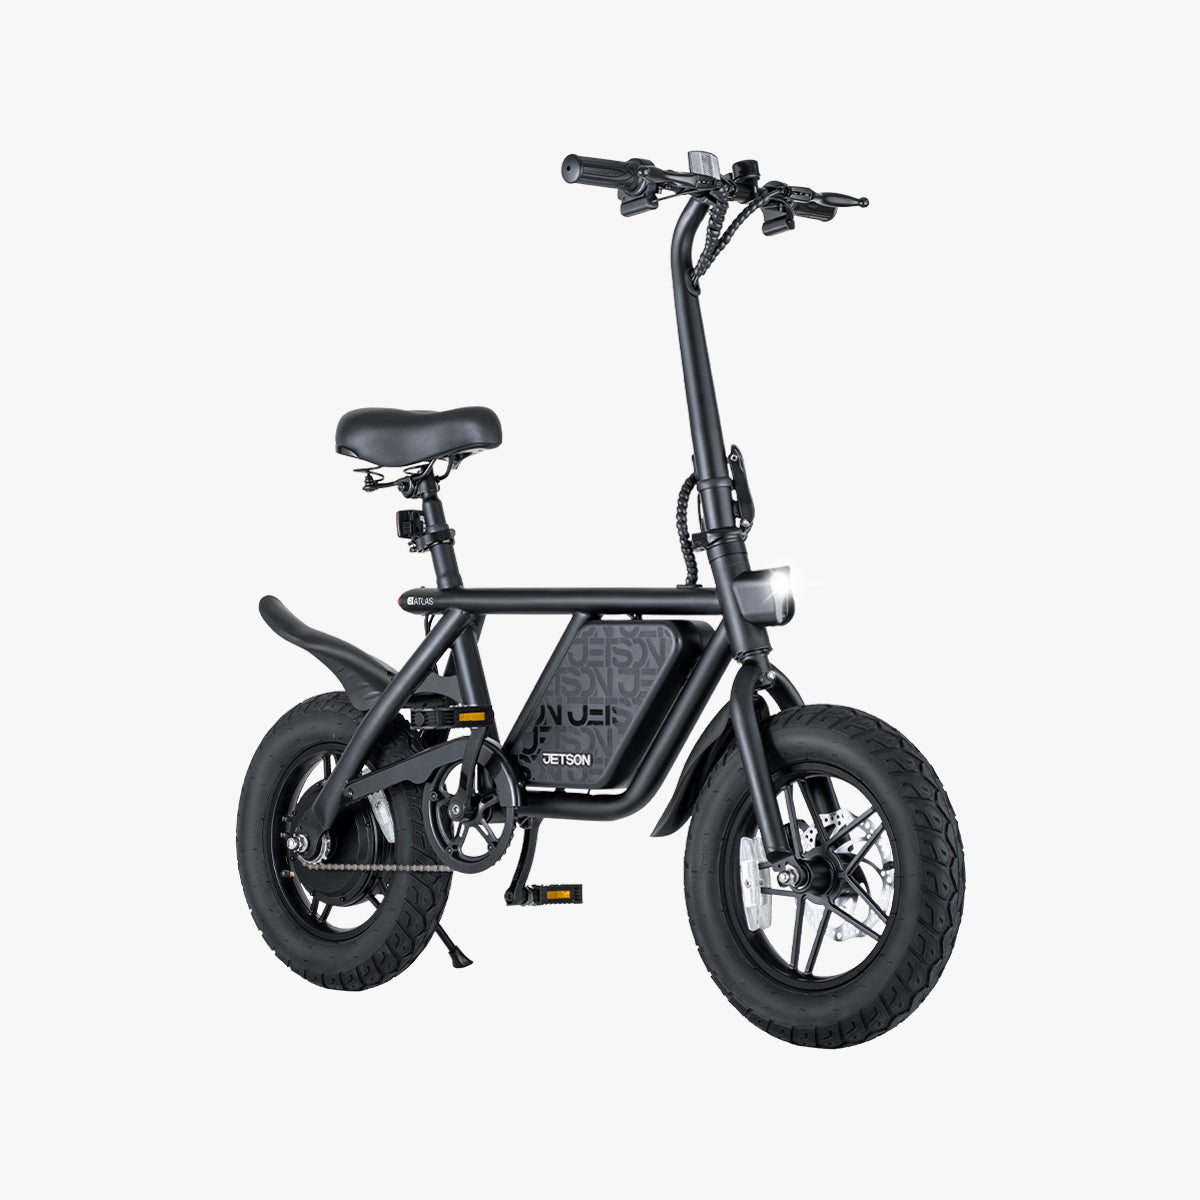 Atlas e-bike angles to the right with the kickstand down